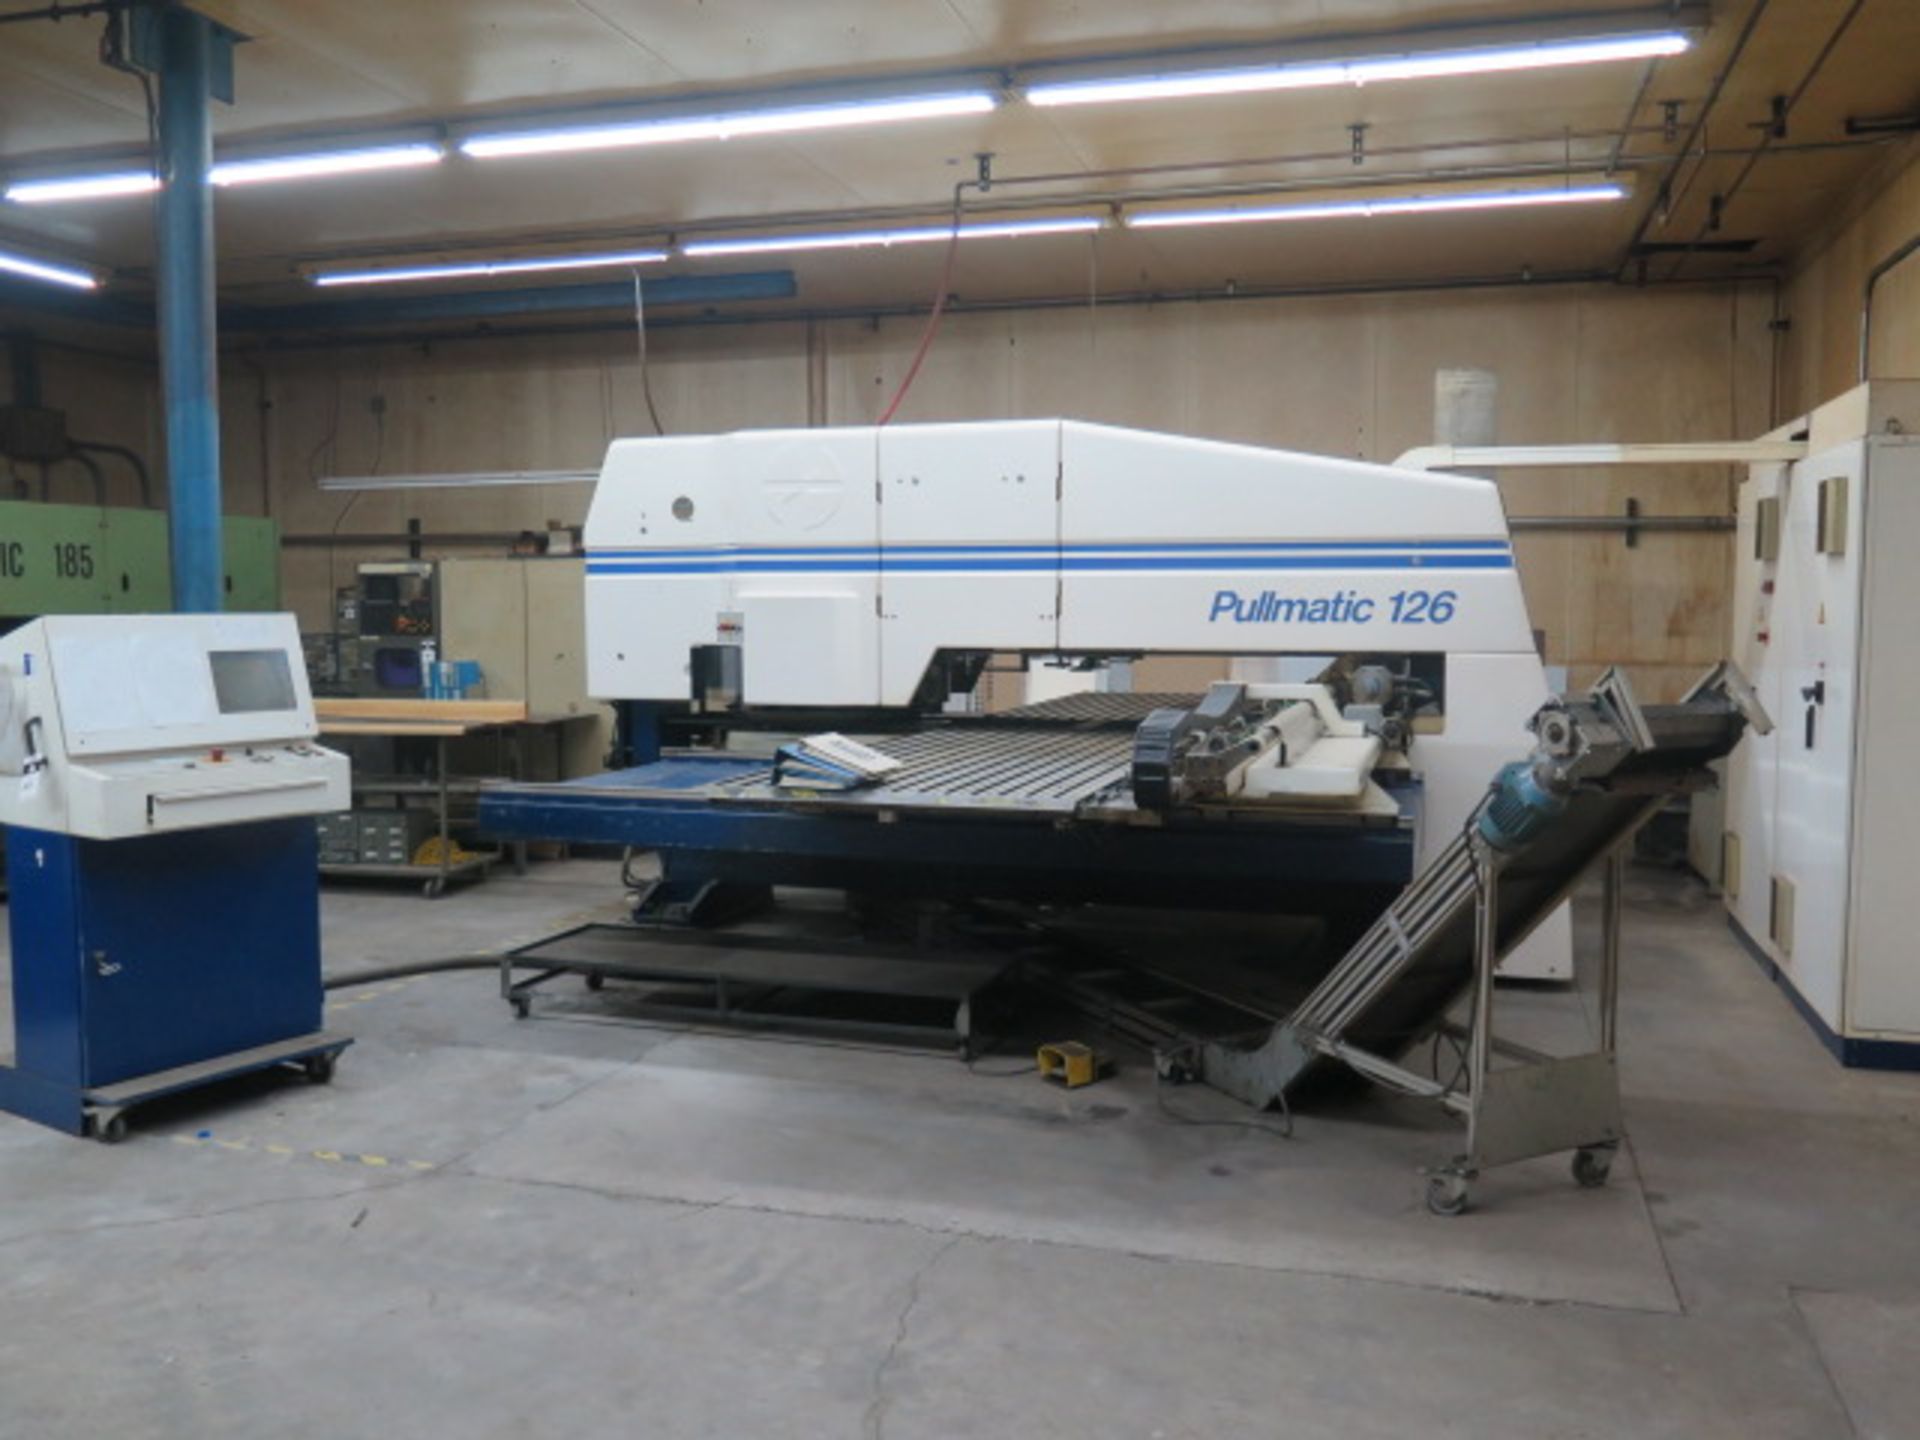 1996 Pullmax Pullmatic 126 33 Ton 15-Station CNC Turret Punch Press s/n 45000027, SOLD AS IS